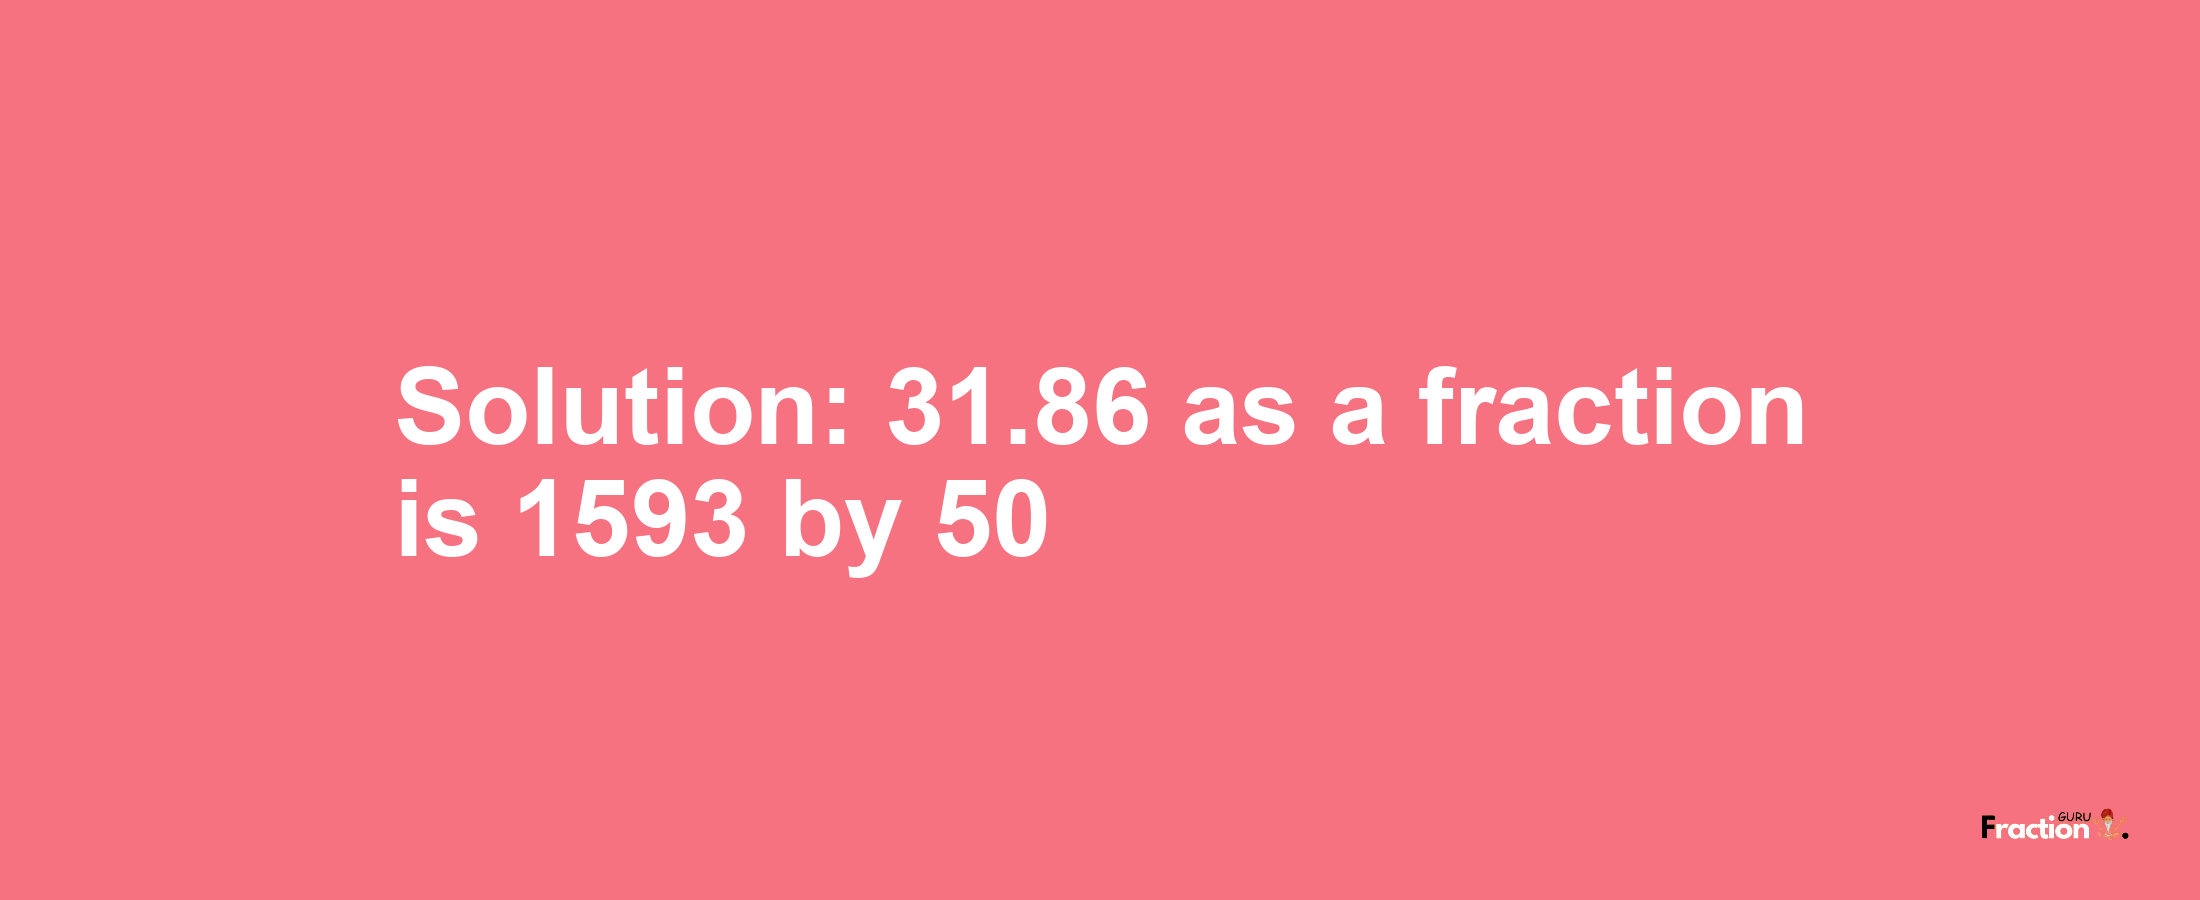 Solution:31.86 as a fraction is 1593/50